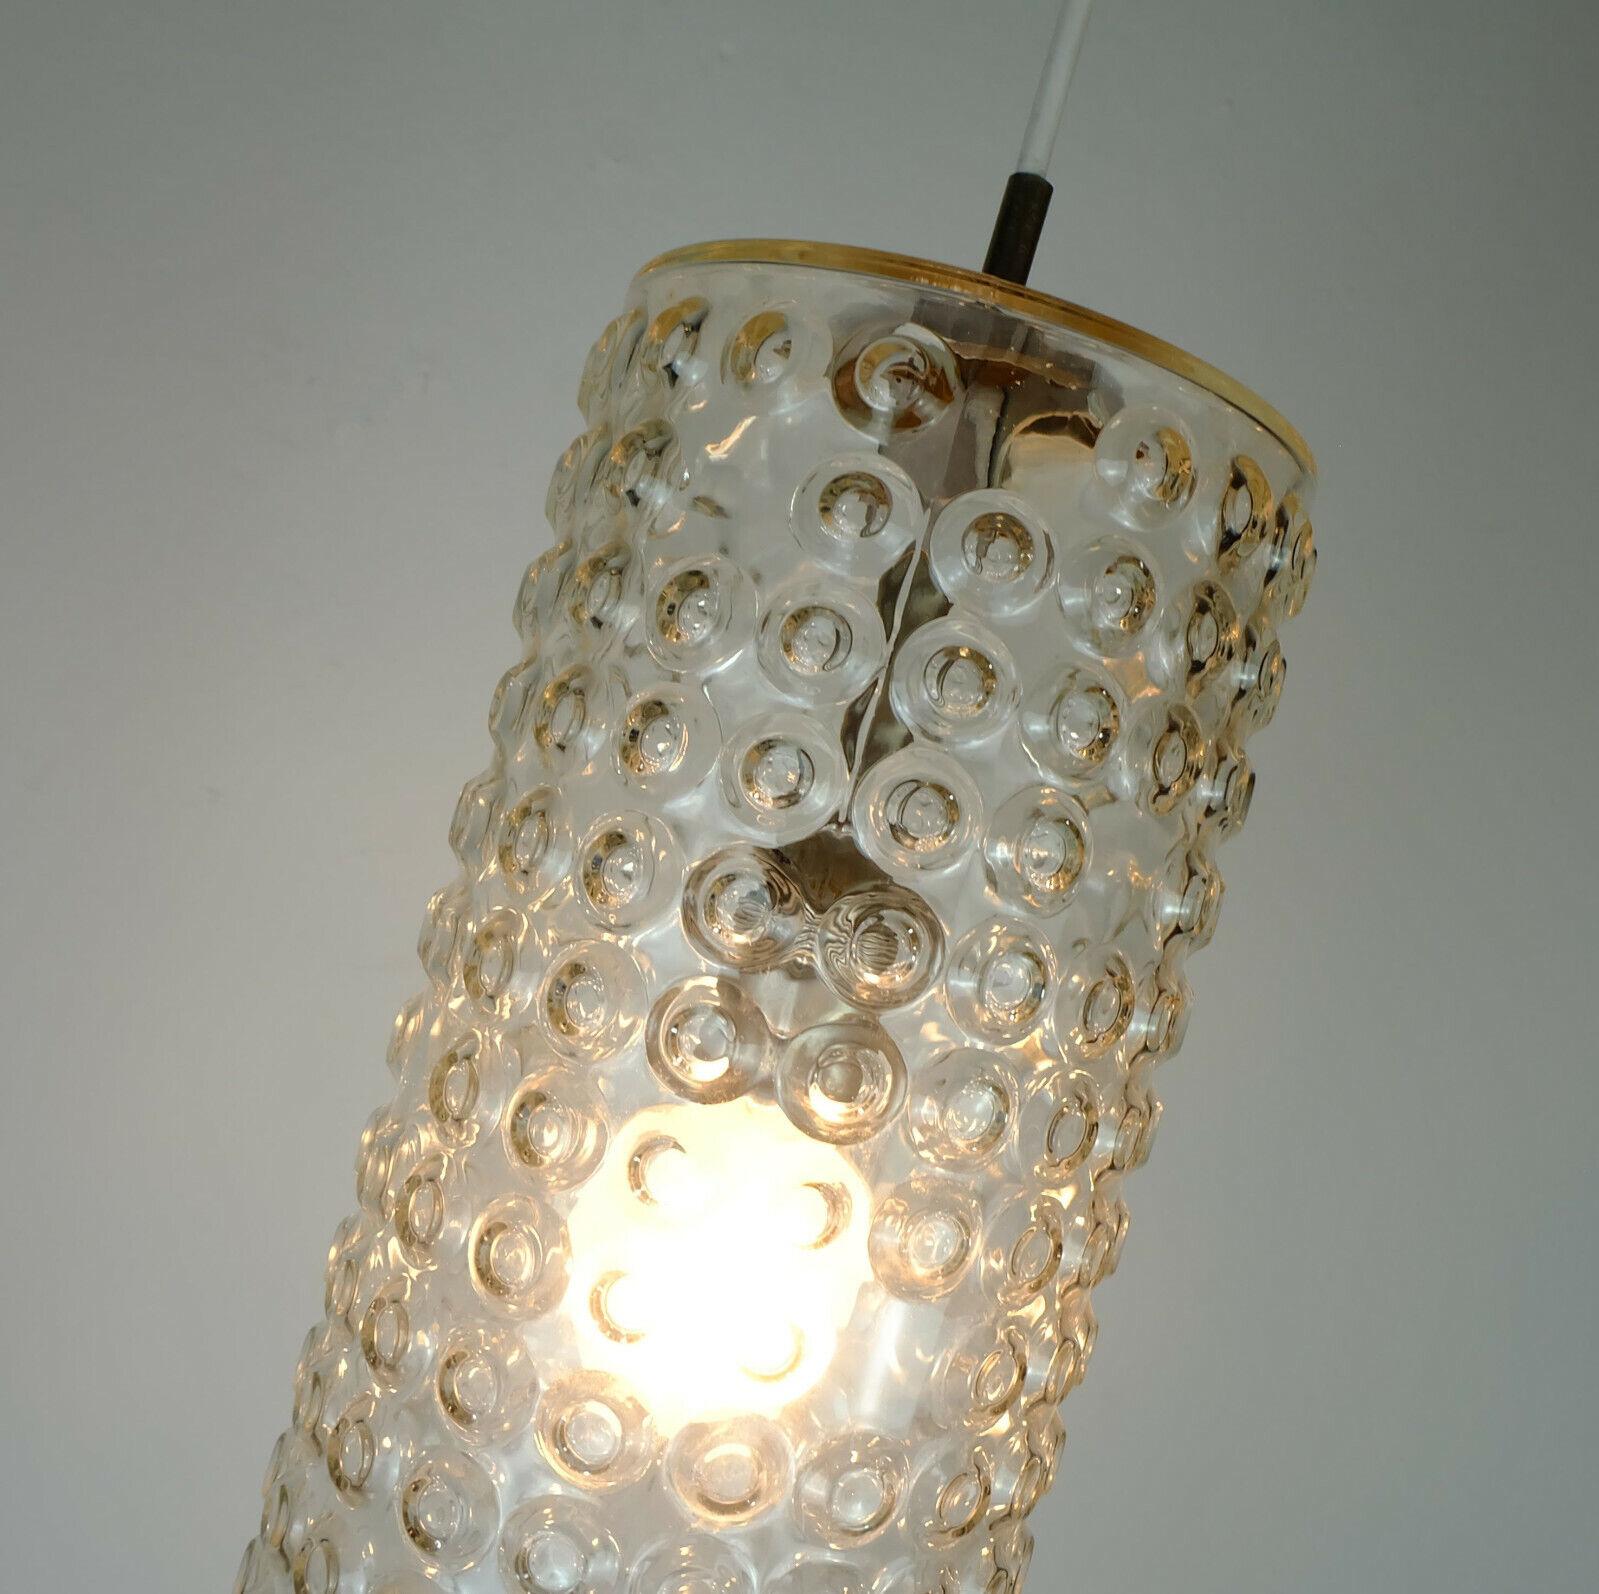 Etched 1 of 2 Huge Cylindrical Pendant Light Staff Rolf Krueger 1967 Bubble Glass  For Sale